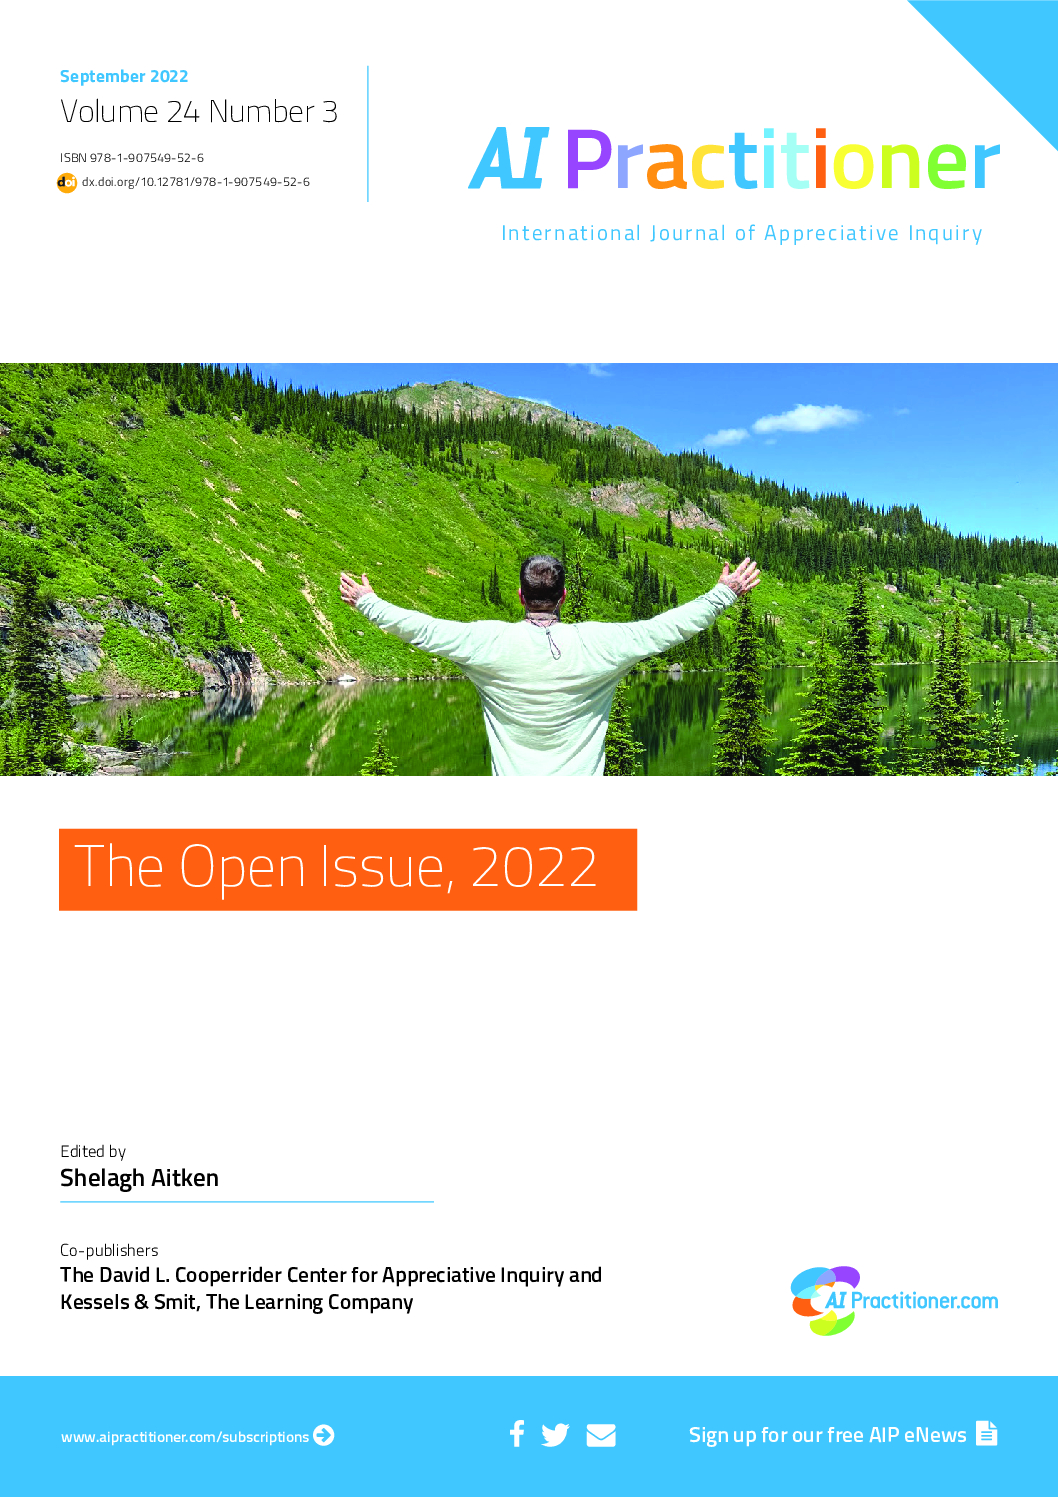 aip-sept-2022-open-issue-successful-educational-practices